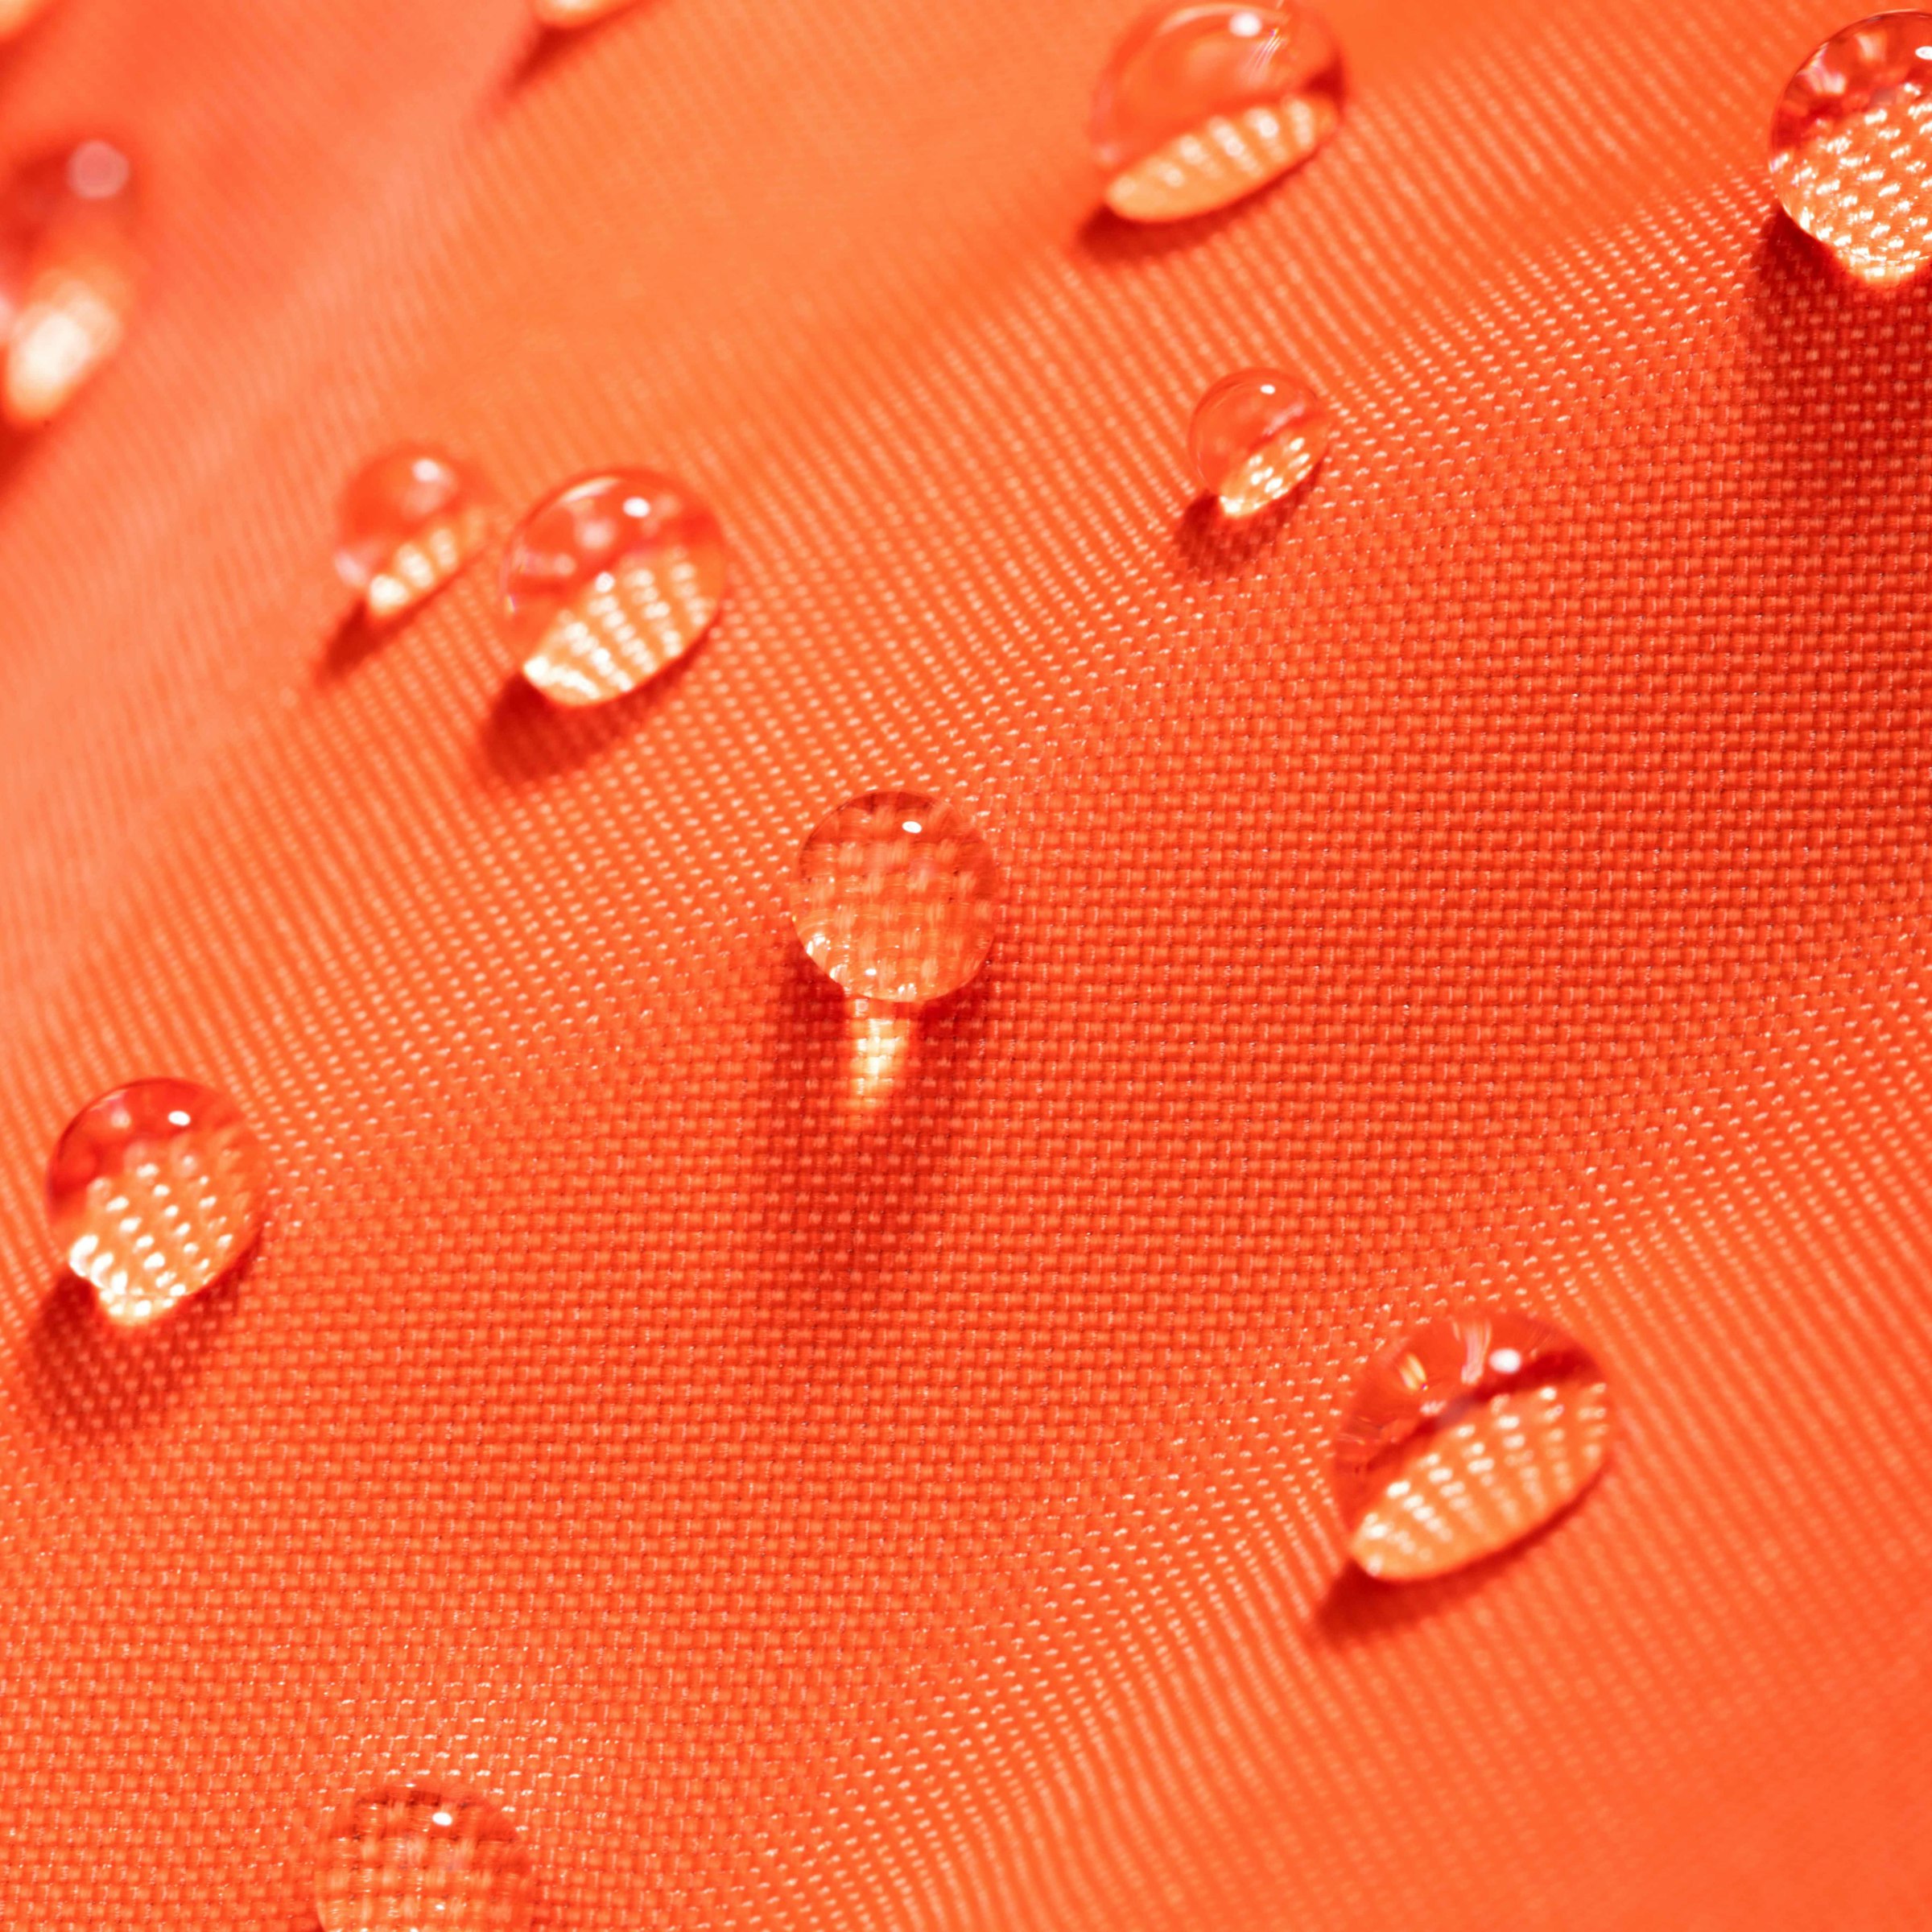 Environmentally considerate PFC-free water-repellent fabric is used throughout